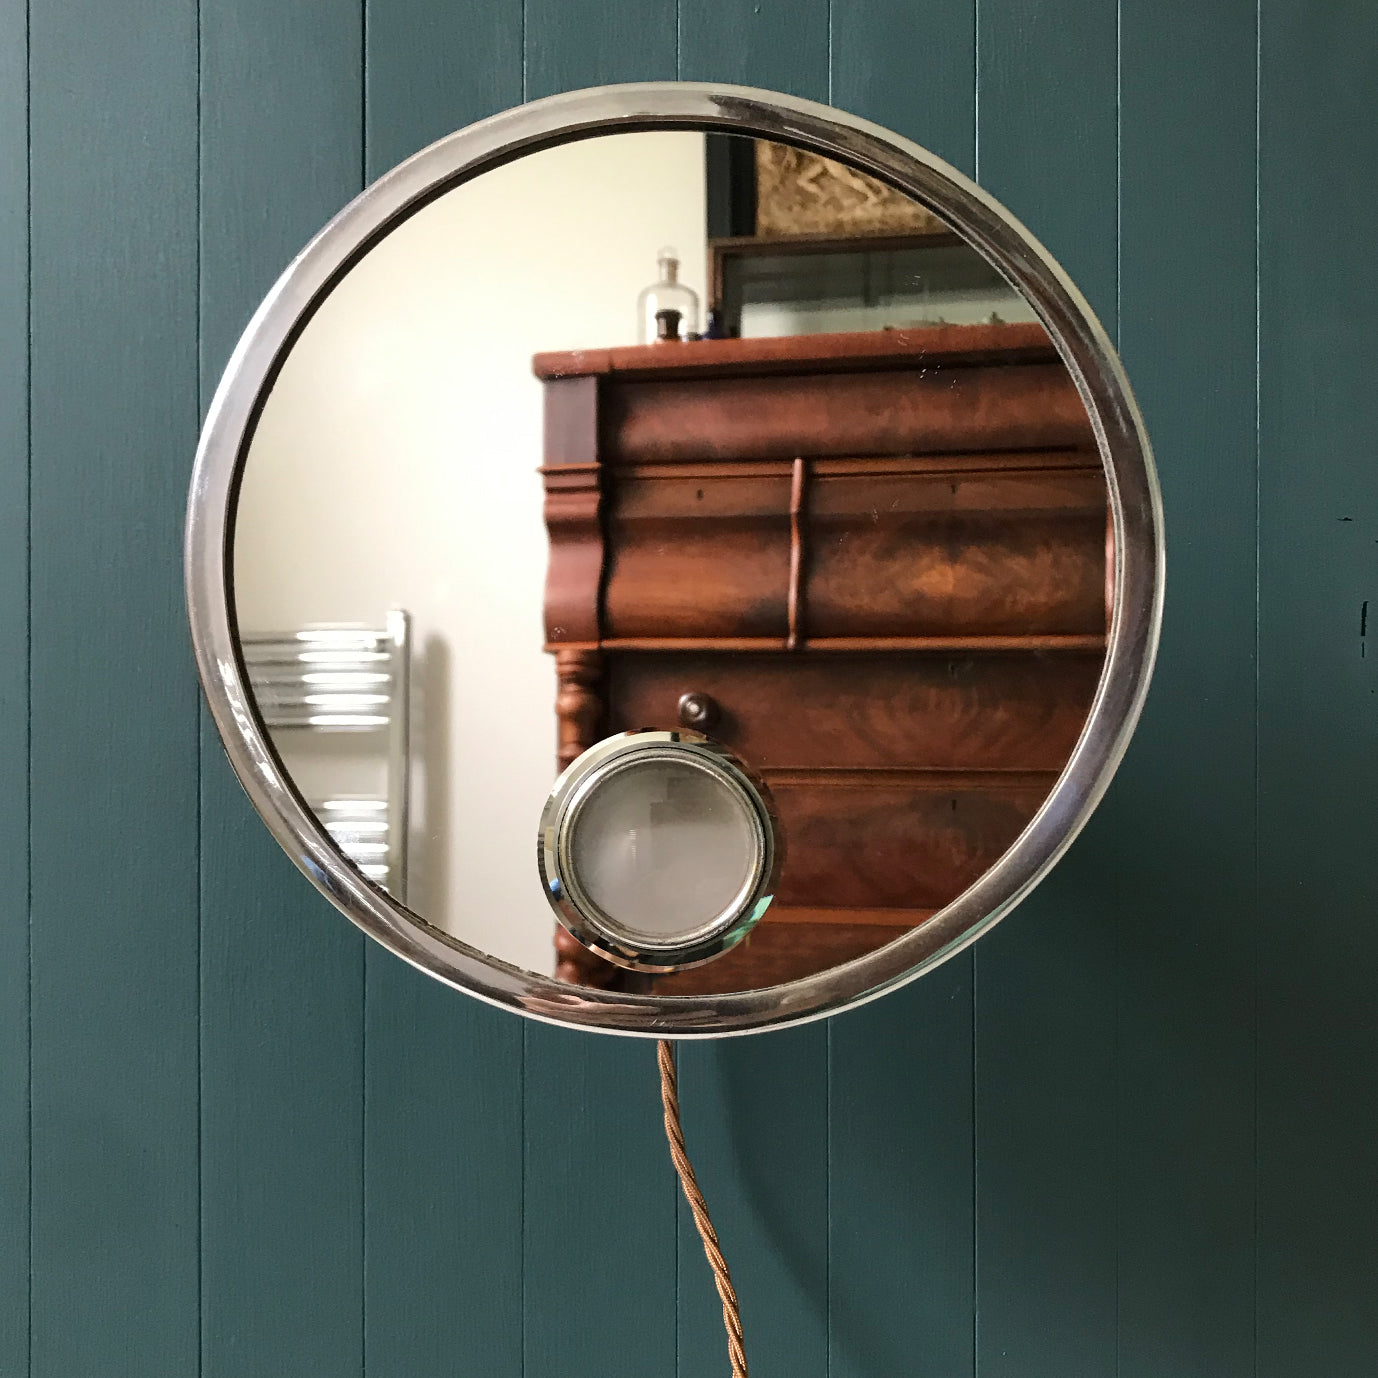 Art Deco Pivotal Shaving Mirror that lights from behind. The main frame and light lens have nickel plate frames. Behind the mirror face is a nickel plated pivotal arm, meaning you can position the mirror in many different ways - SHOP NOW - www.intovintage.co.uk